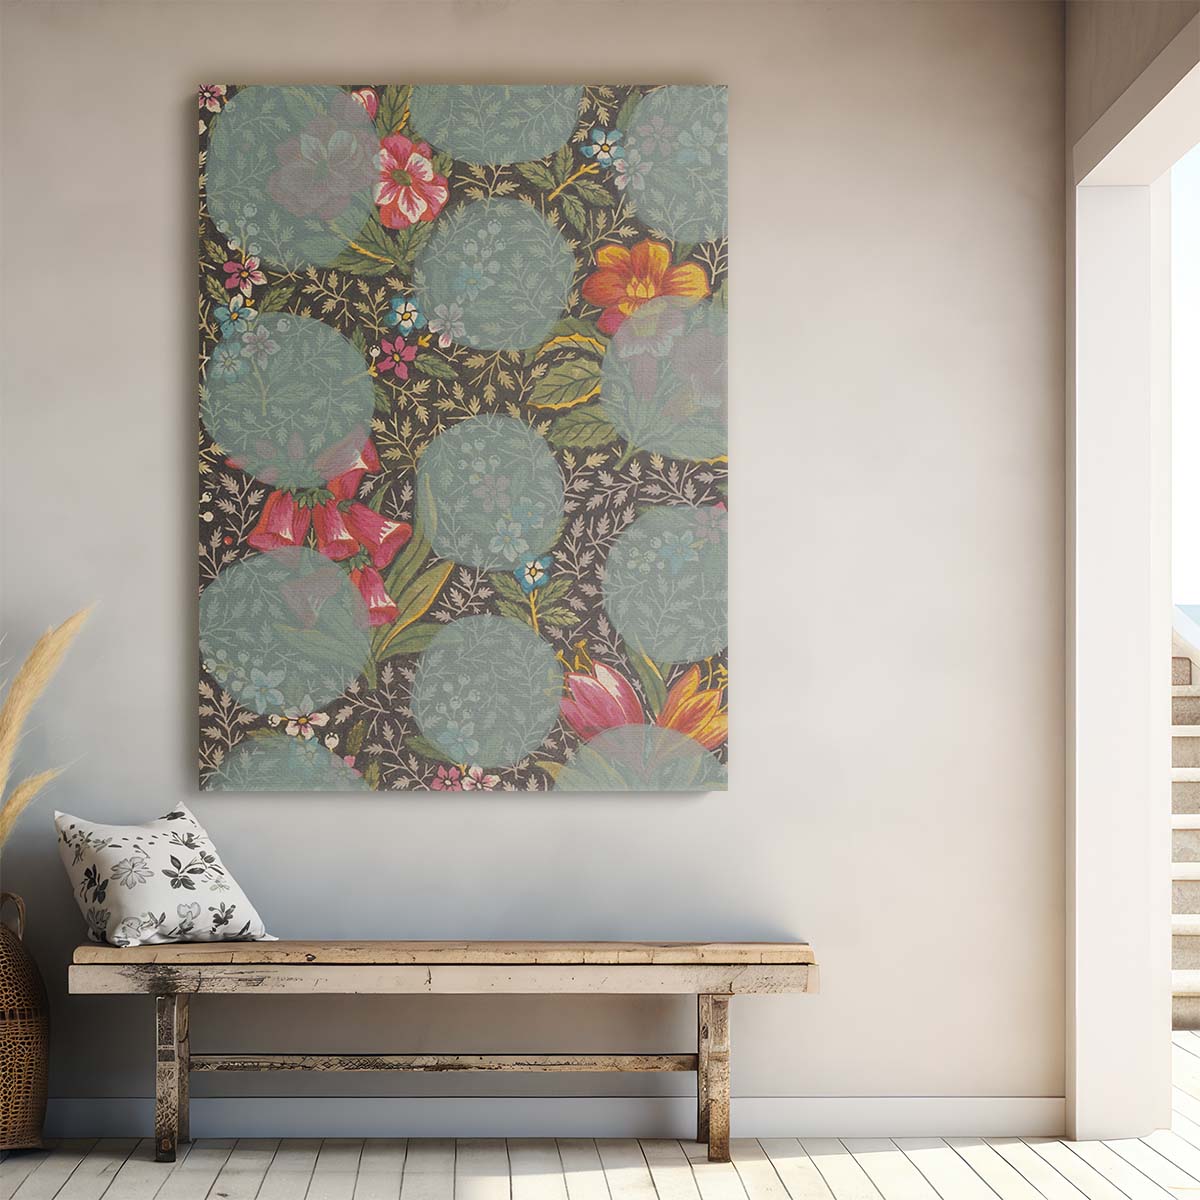 Modern Abstract Flower Collage Illustration by Yopie Studio by Luxuriance Designs, made in USA